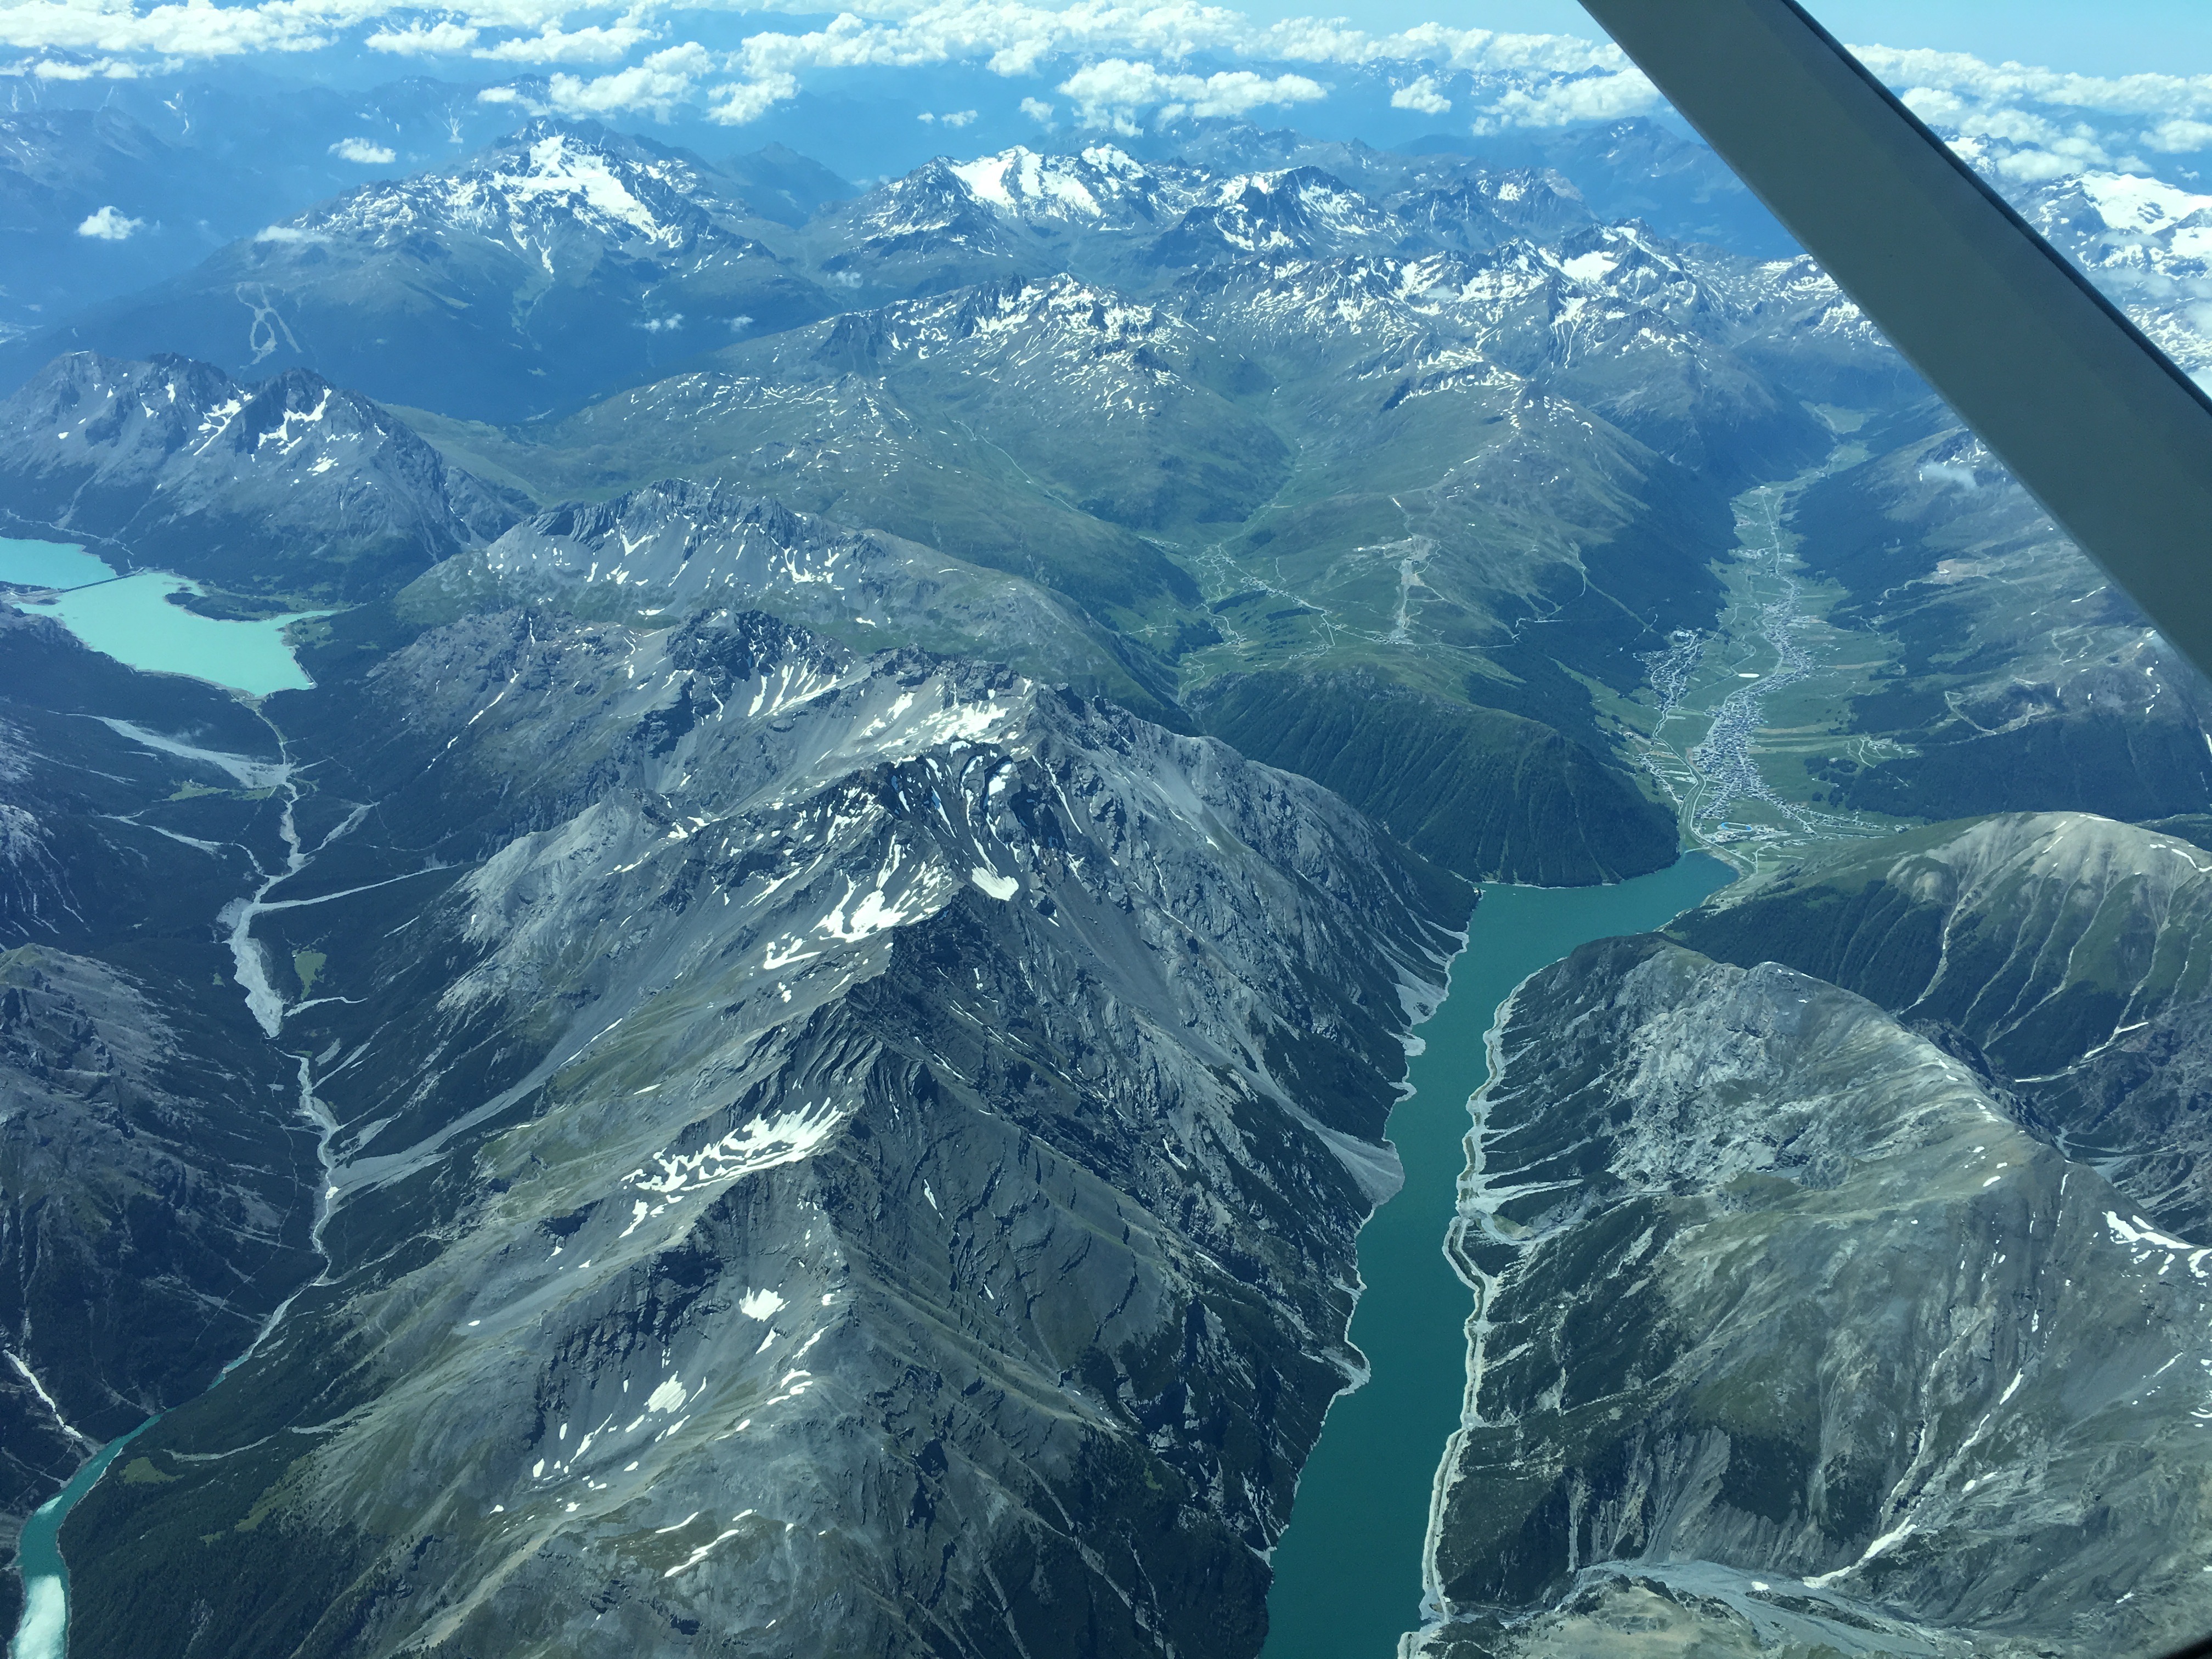 Great views from the operator seat during a mission over the Swiss National Park